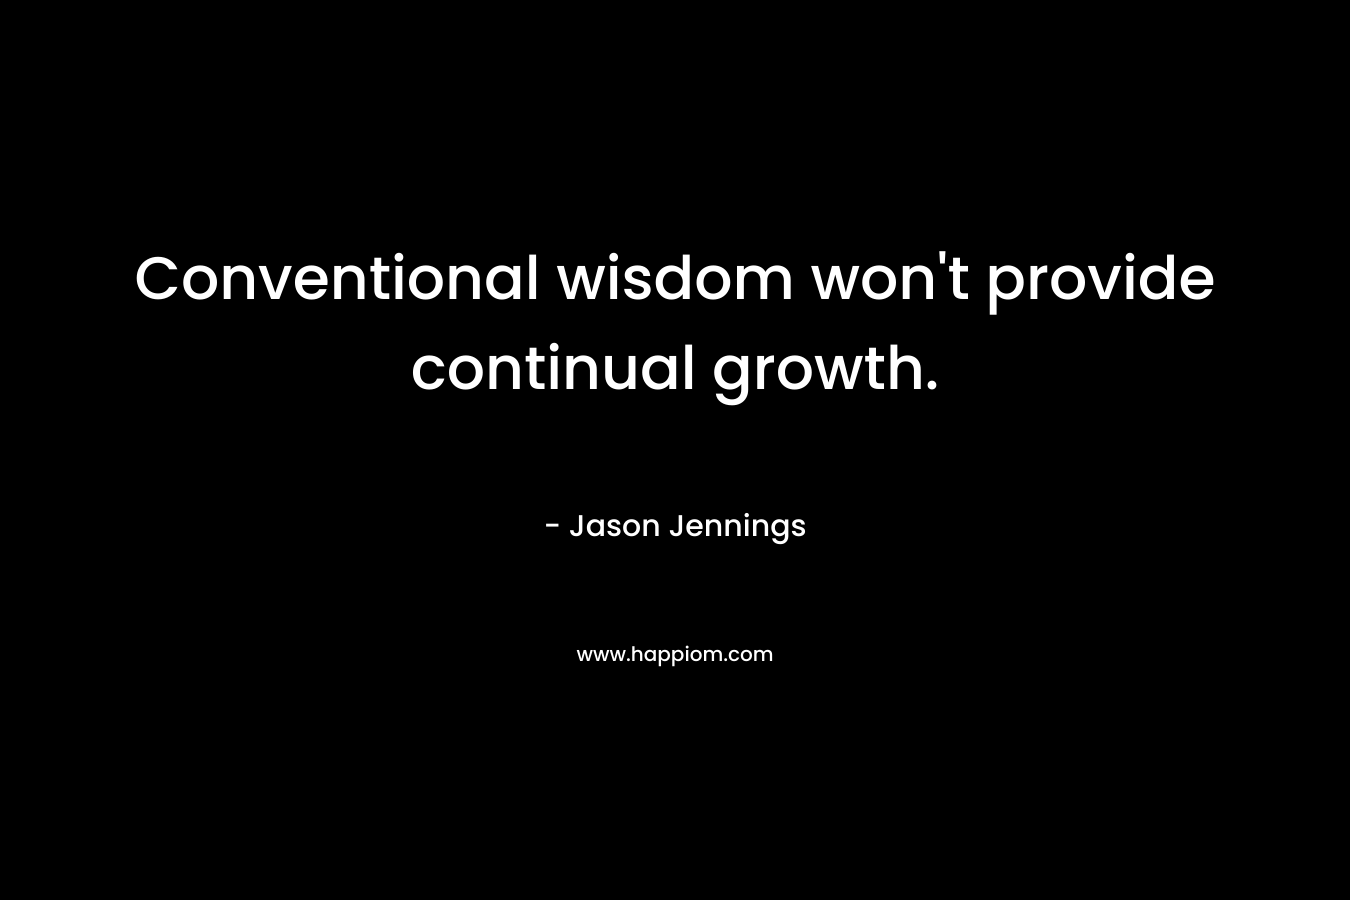 Conventional wisdom won't provide continual growth.